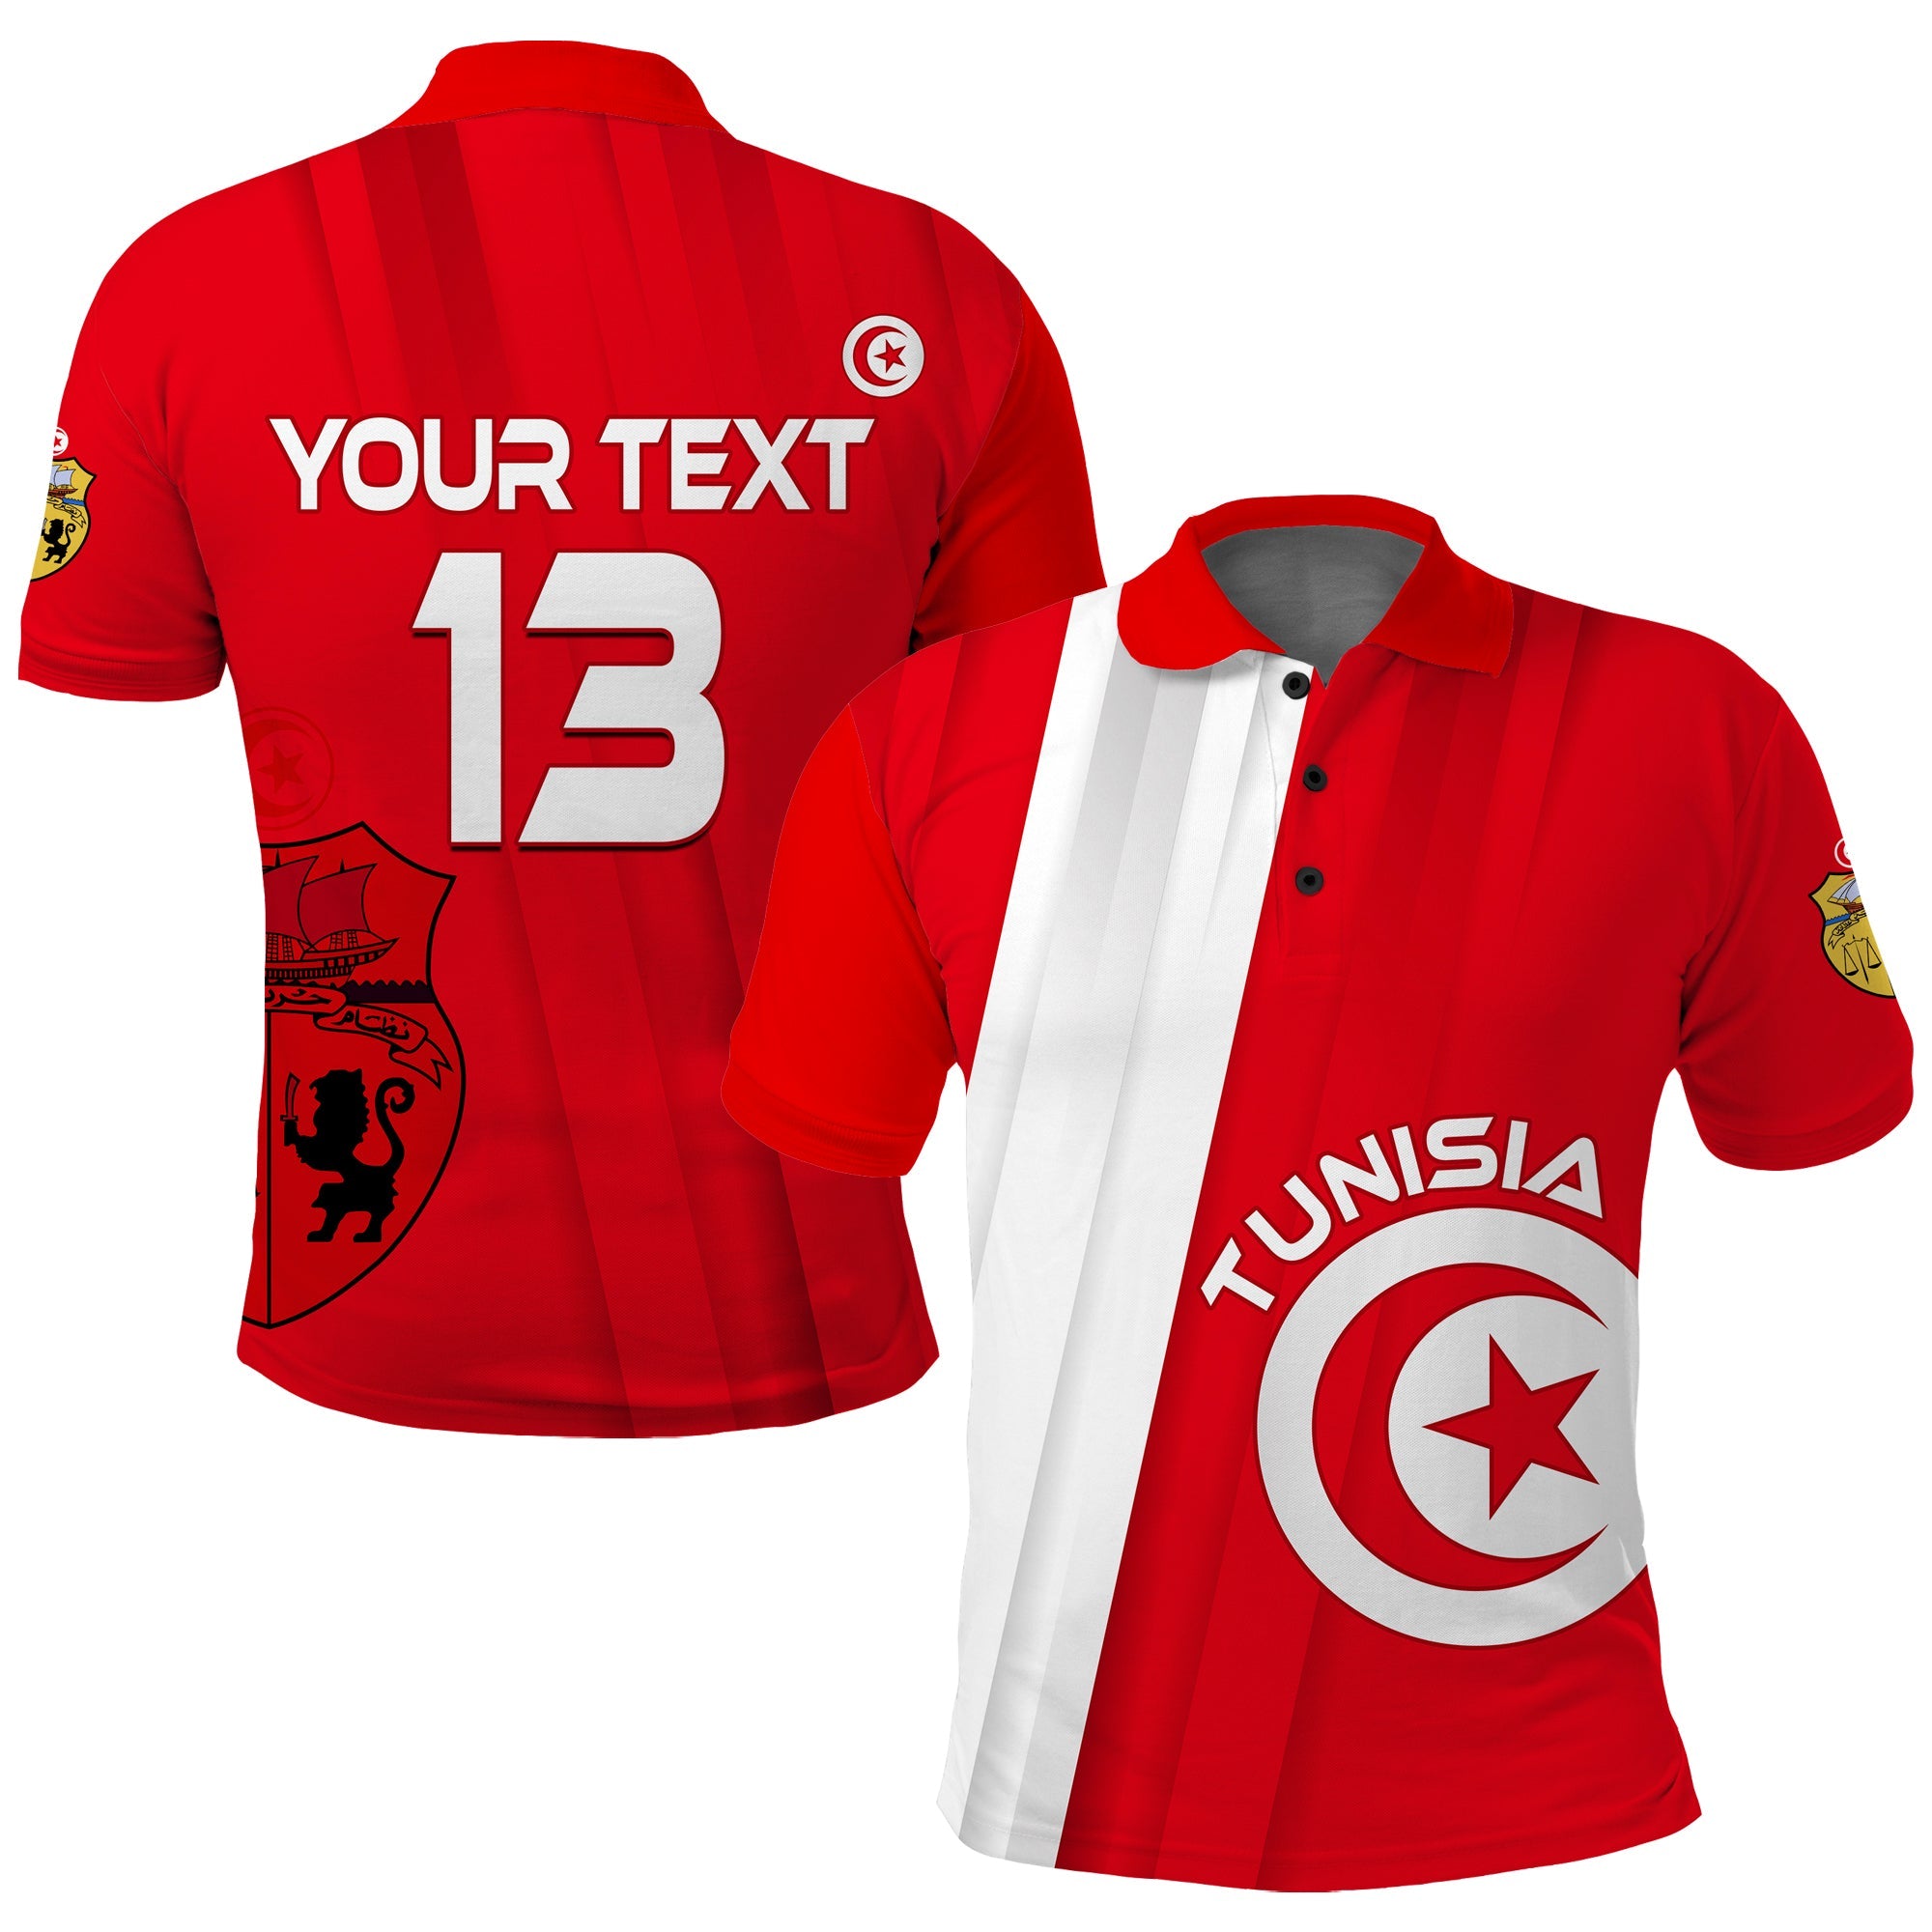 custom-text-and-number-tunisia-polo-shirt-always-in-my-heart